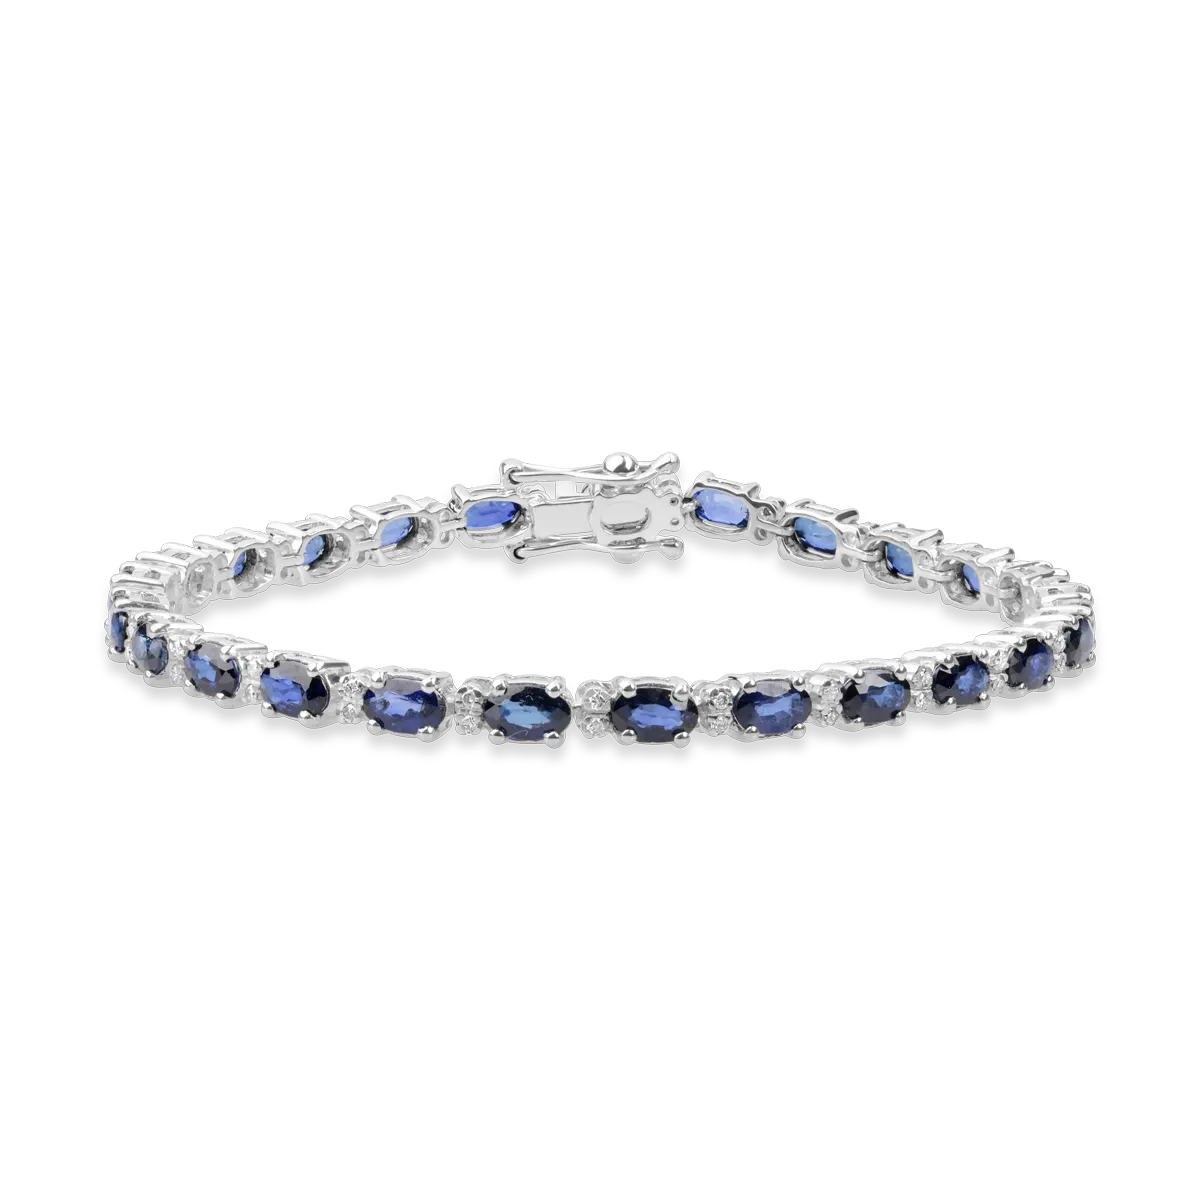 18K white gold tennis bracelet with 7.71ct treated sapphires and 0.27ct diamonds